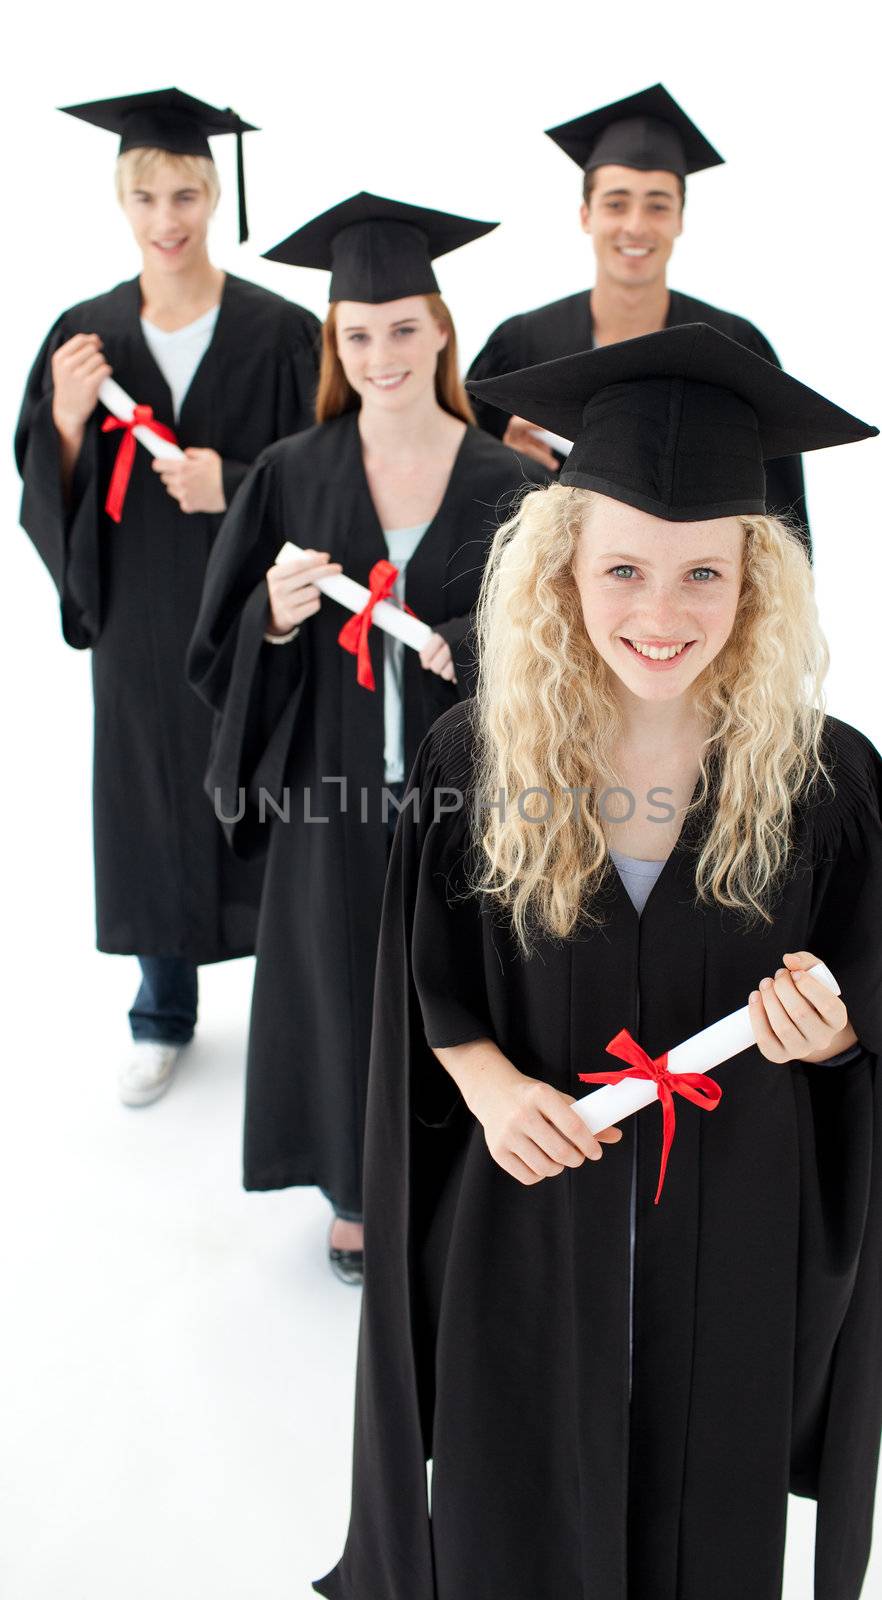 Smiling group of teenagers celebrating after Graduation